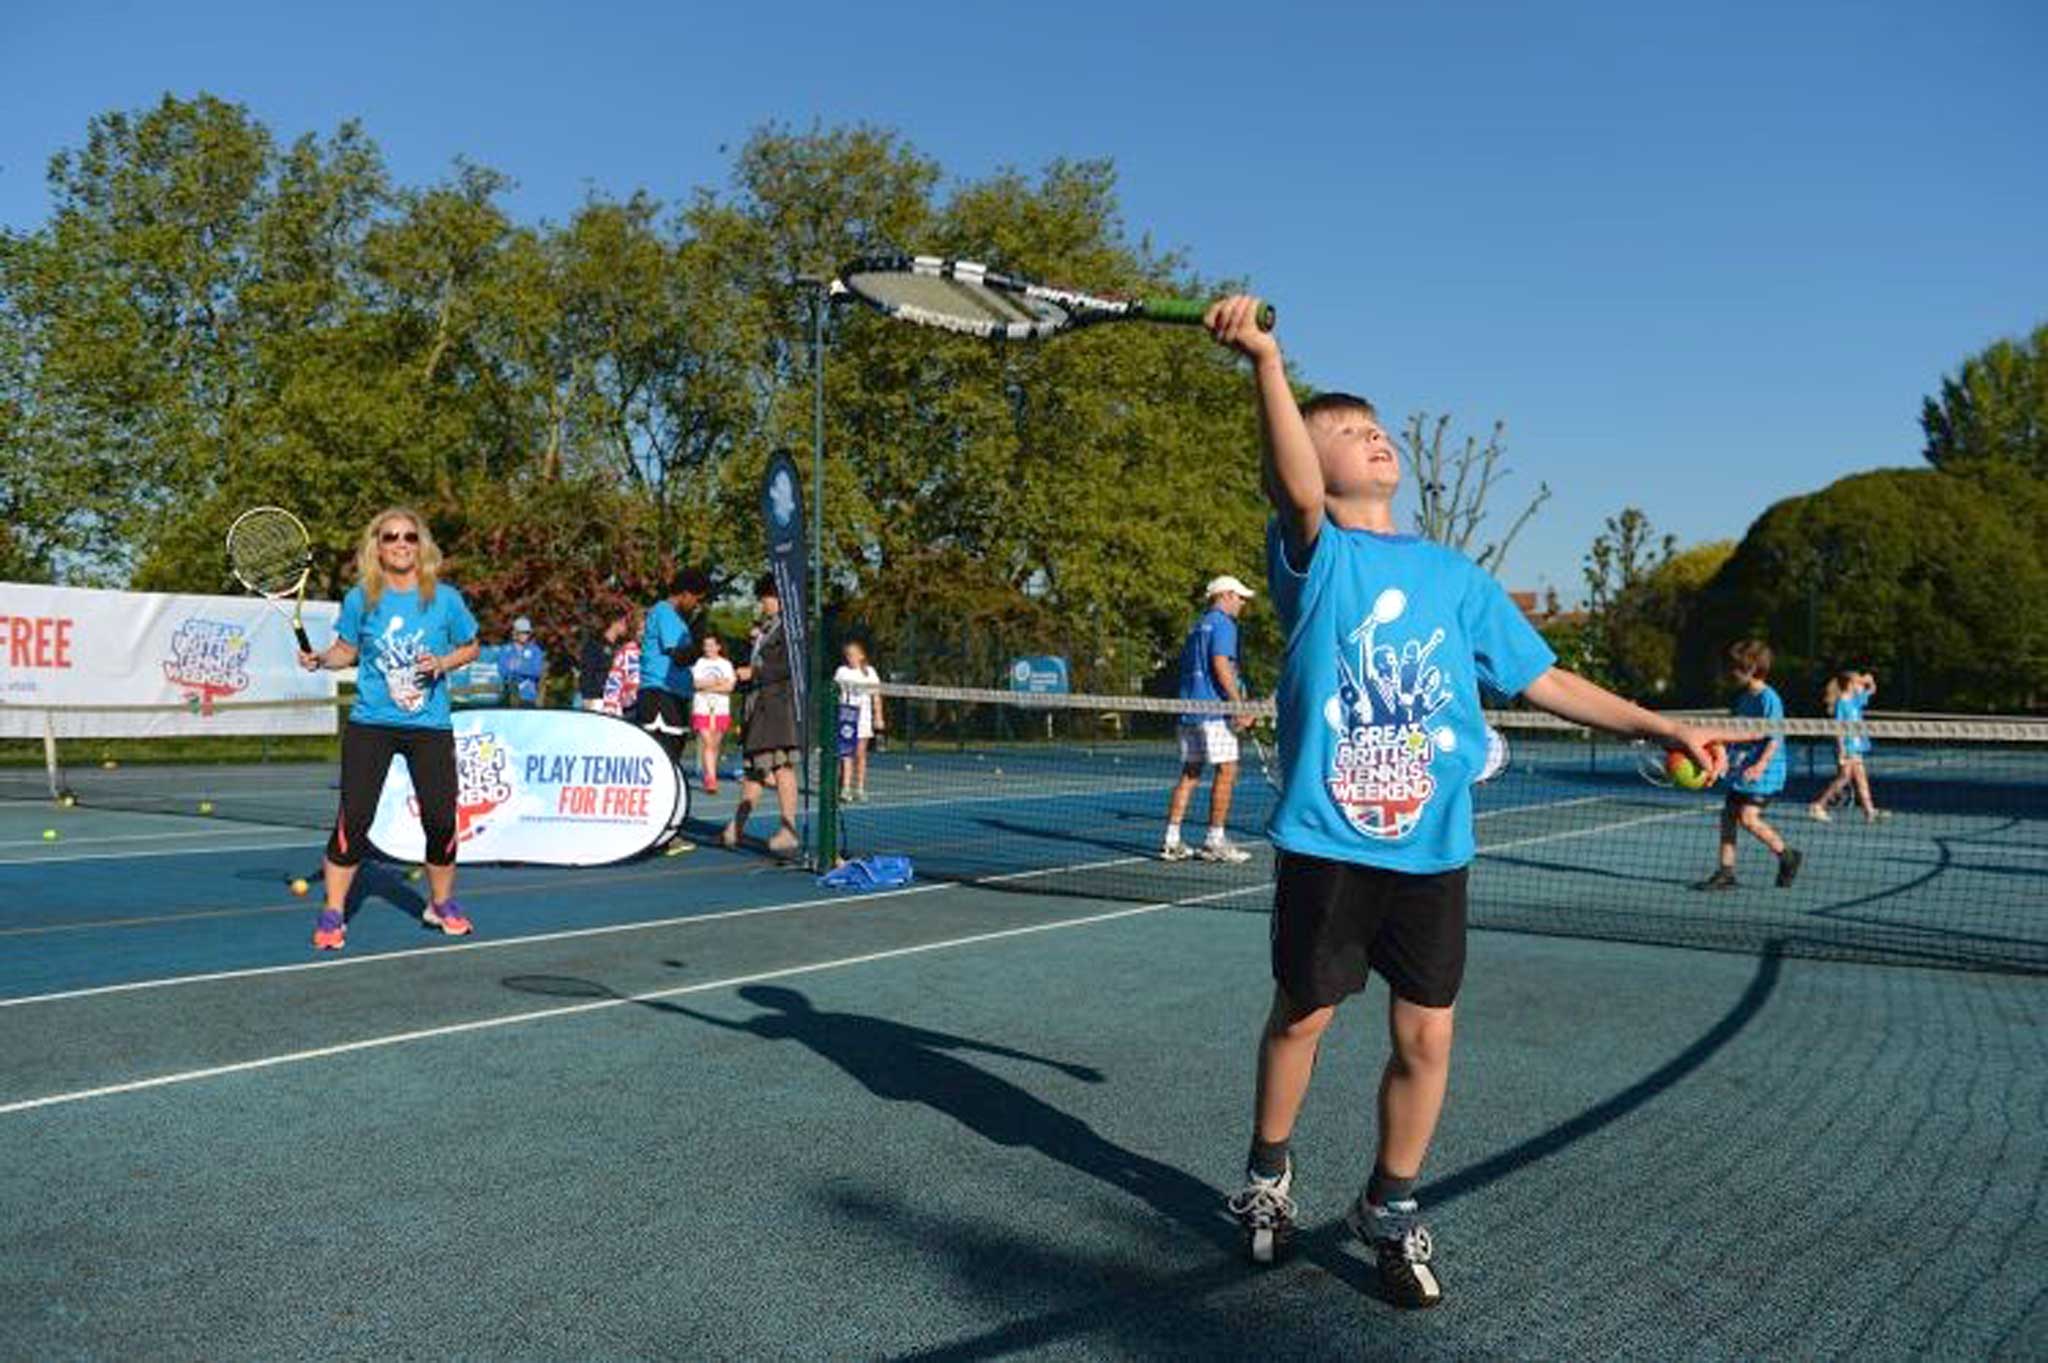 What a racquet: David Lloyd is offering free coaching